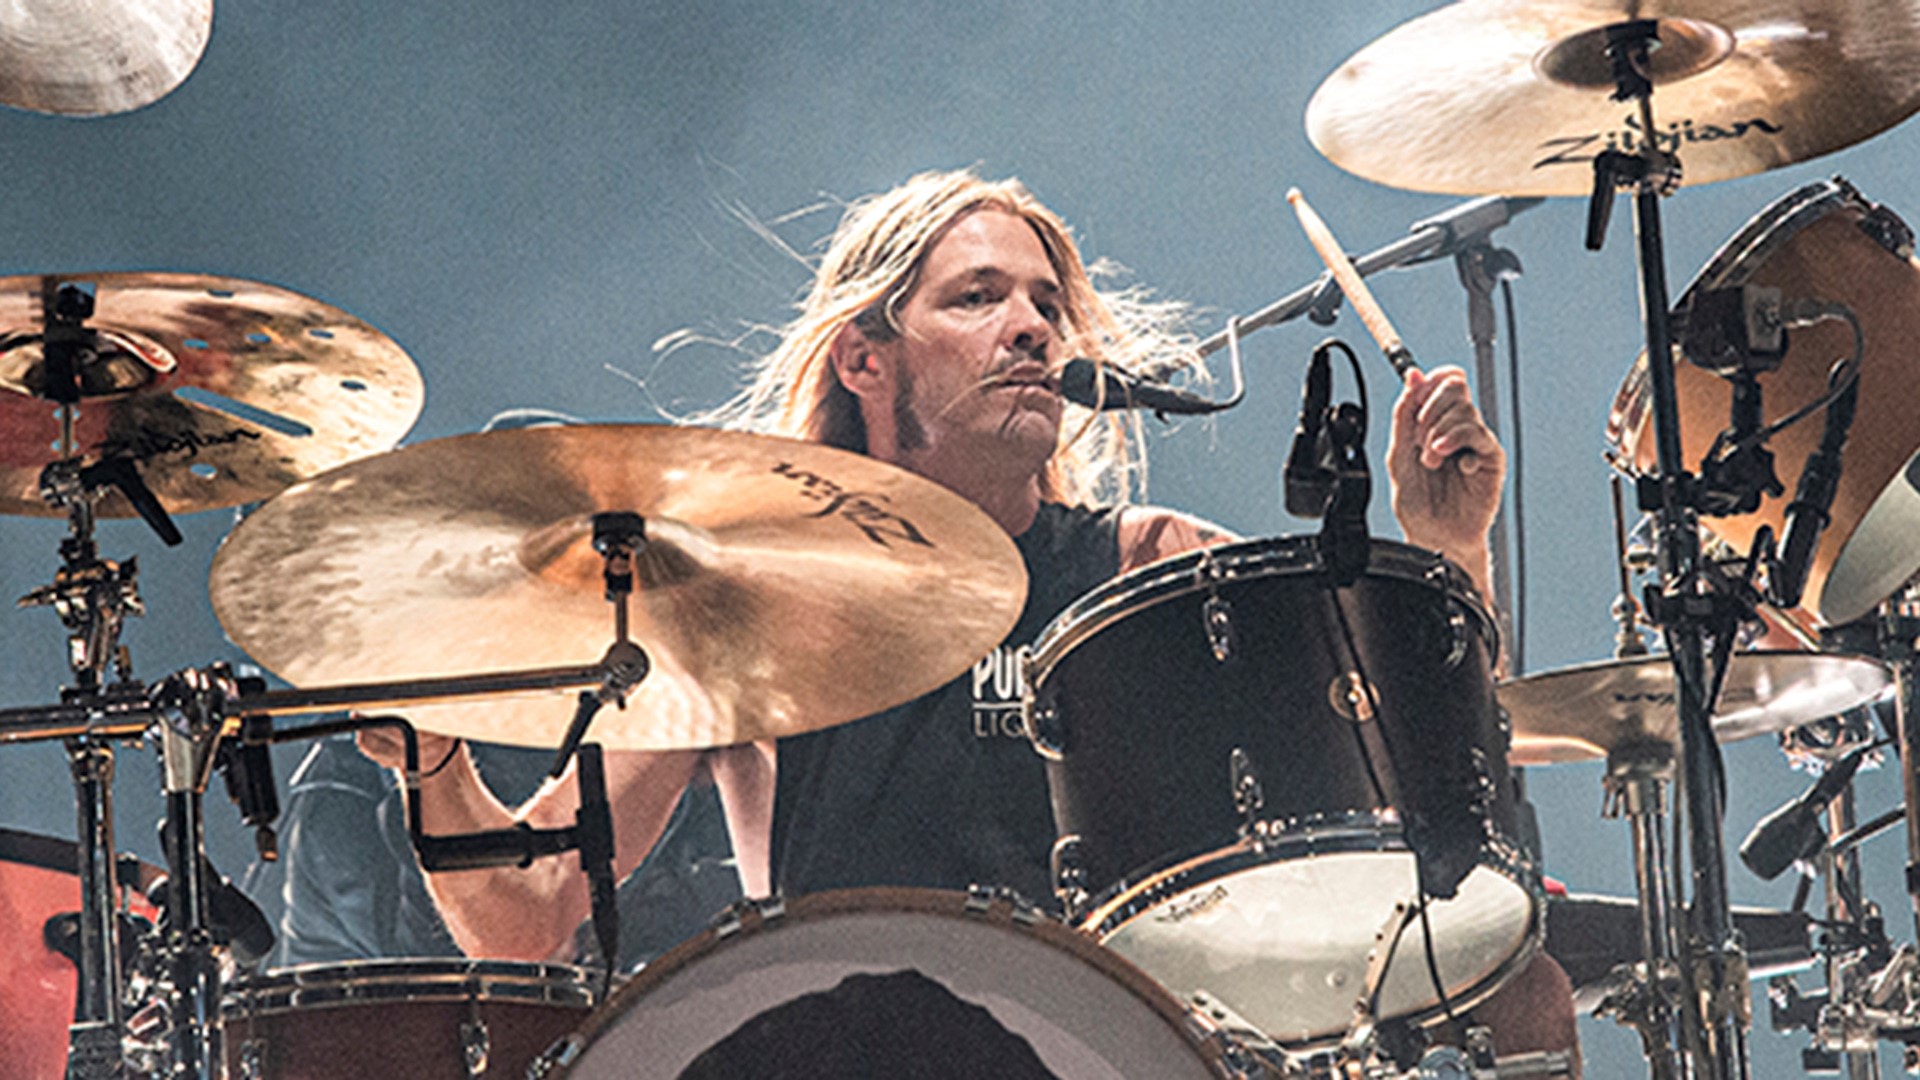 "The Foo Fighters family is devastated by the tragic and untimely loss of our beloved Taylor Hawkins," the band announced Friday.